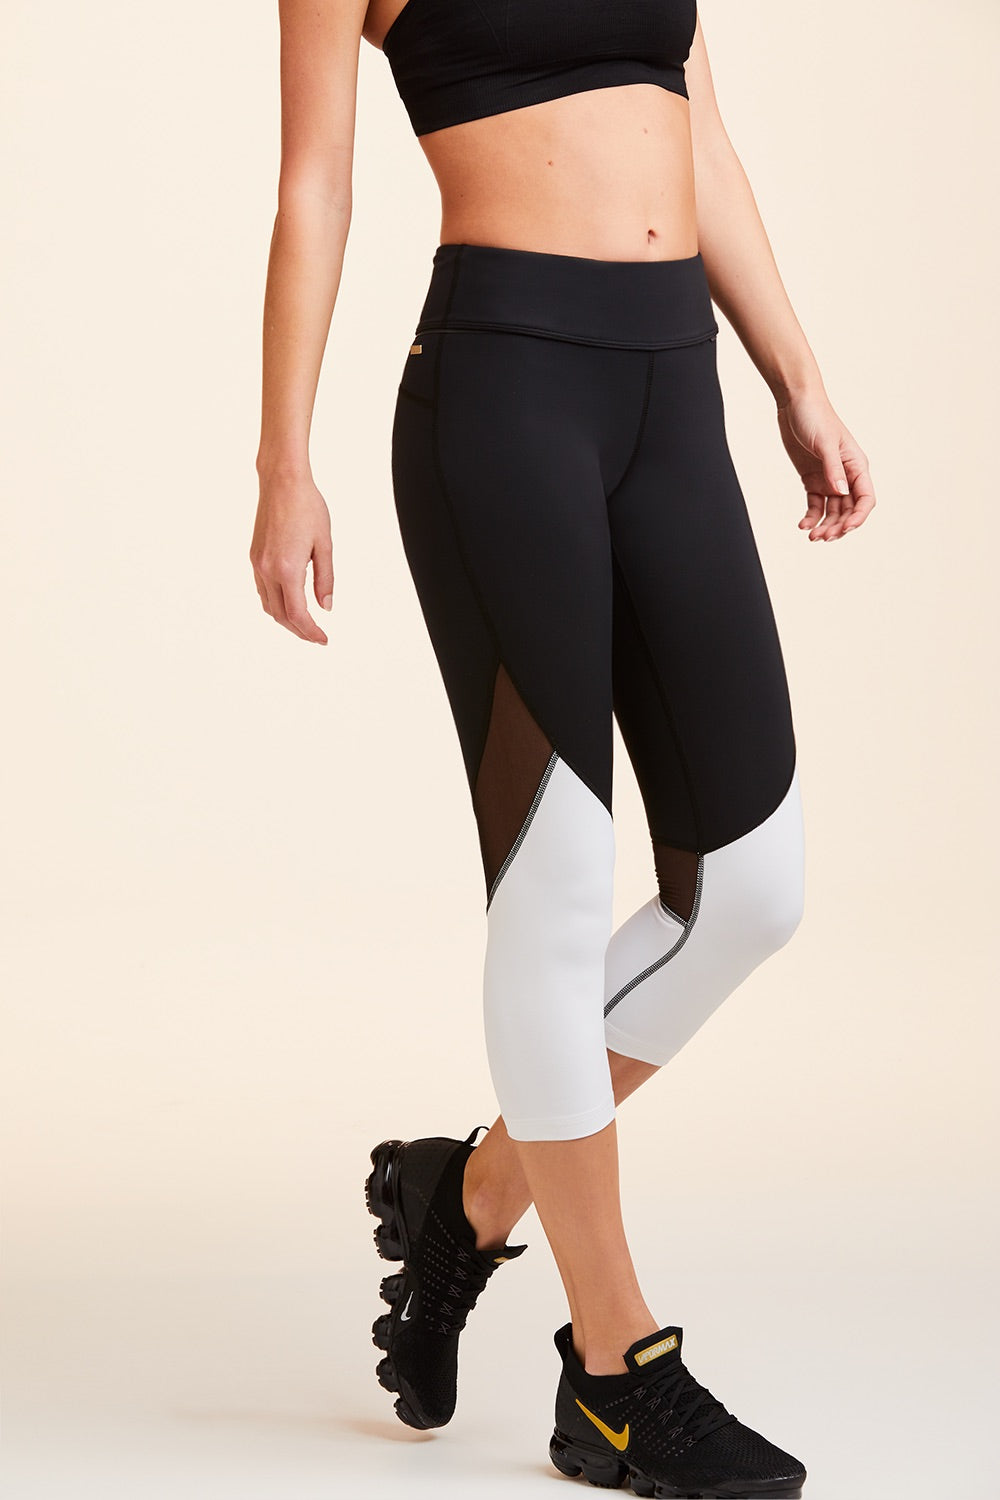 Side view of Alala Women's Luxury Athleisure cropped black and white tight with mesh paneling on back of knees.